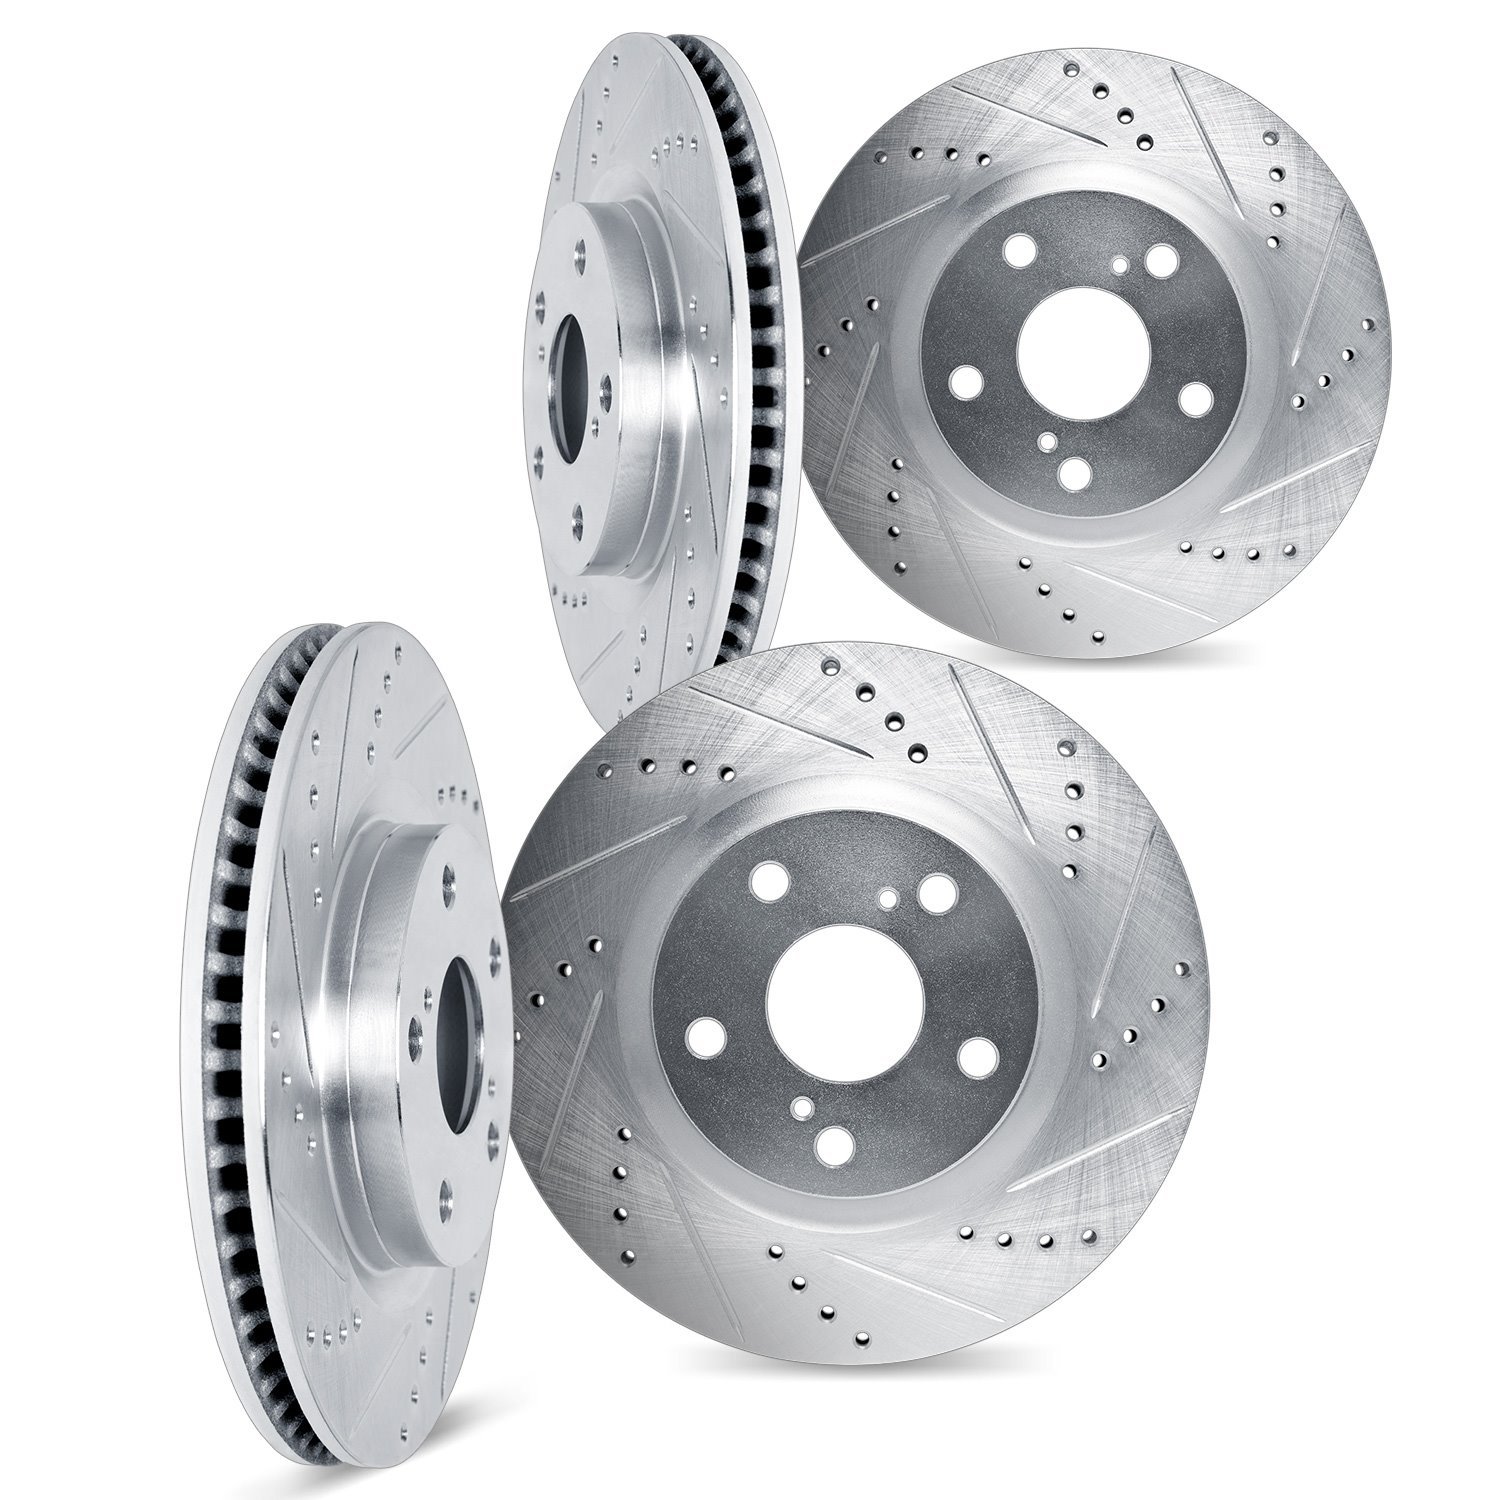 7004-31109 Drilled/Slotted Brake Rotors [Silver], Fits Select Lexus/Toyota/Scion, Position: Front and Rear